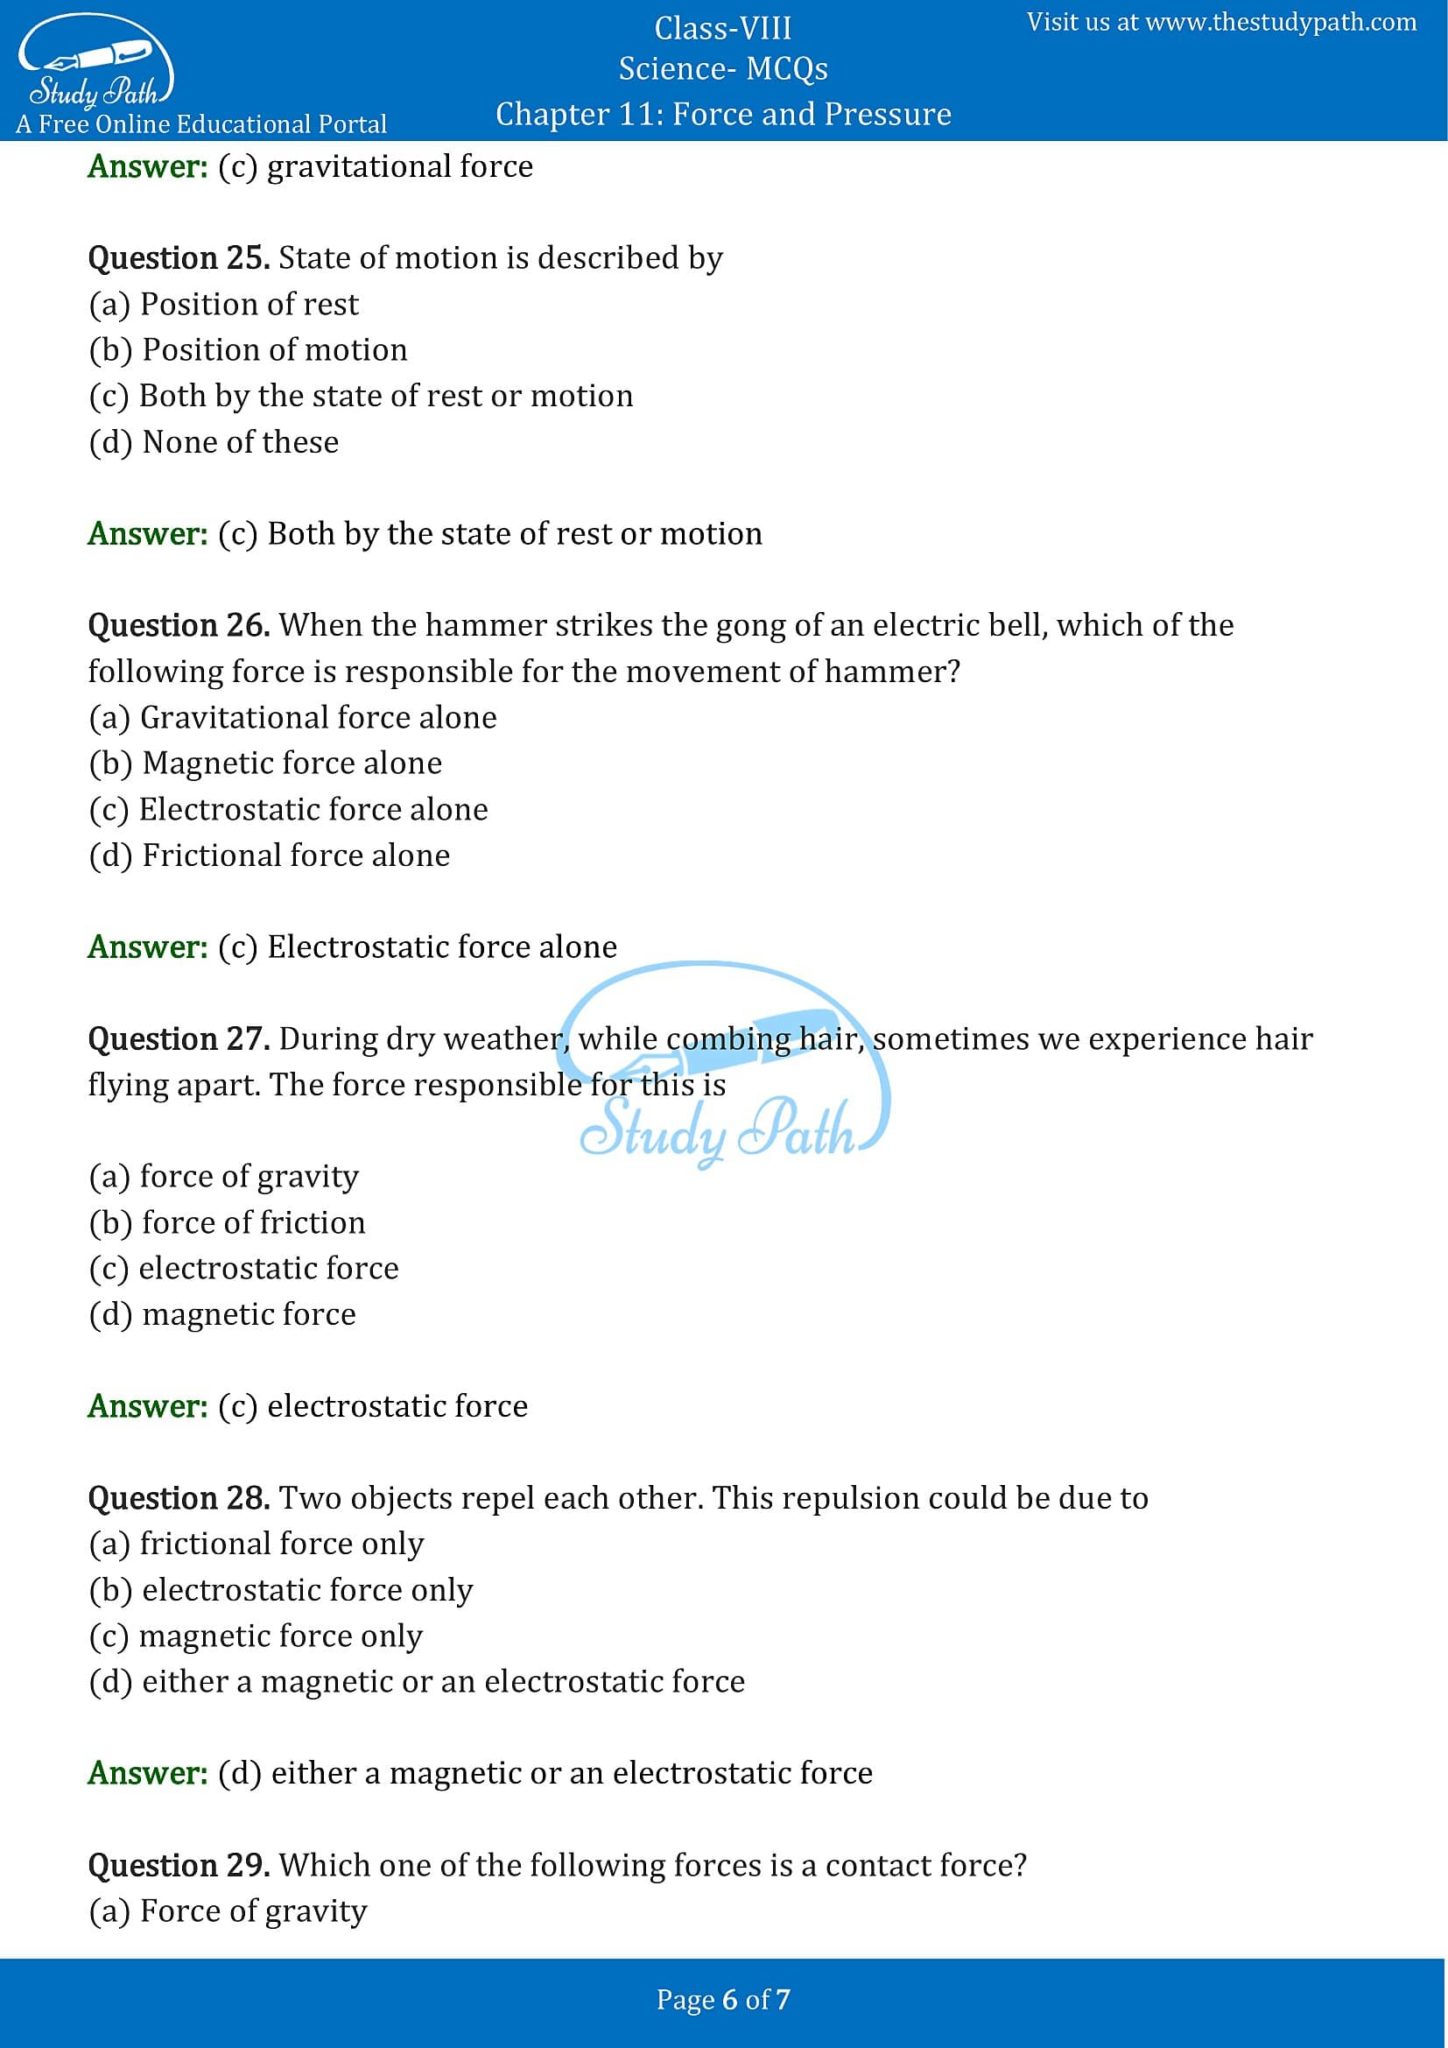 case study questions on force and pressure class 8